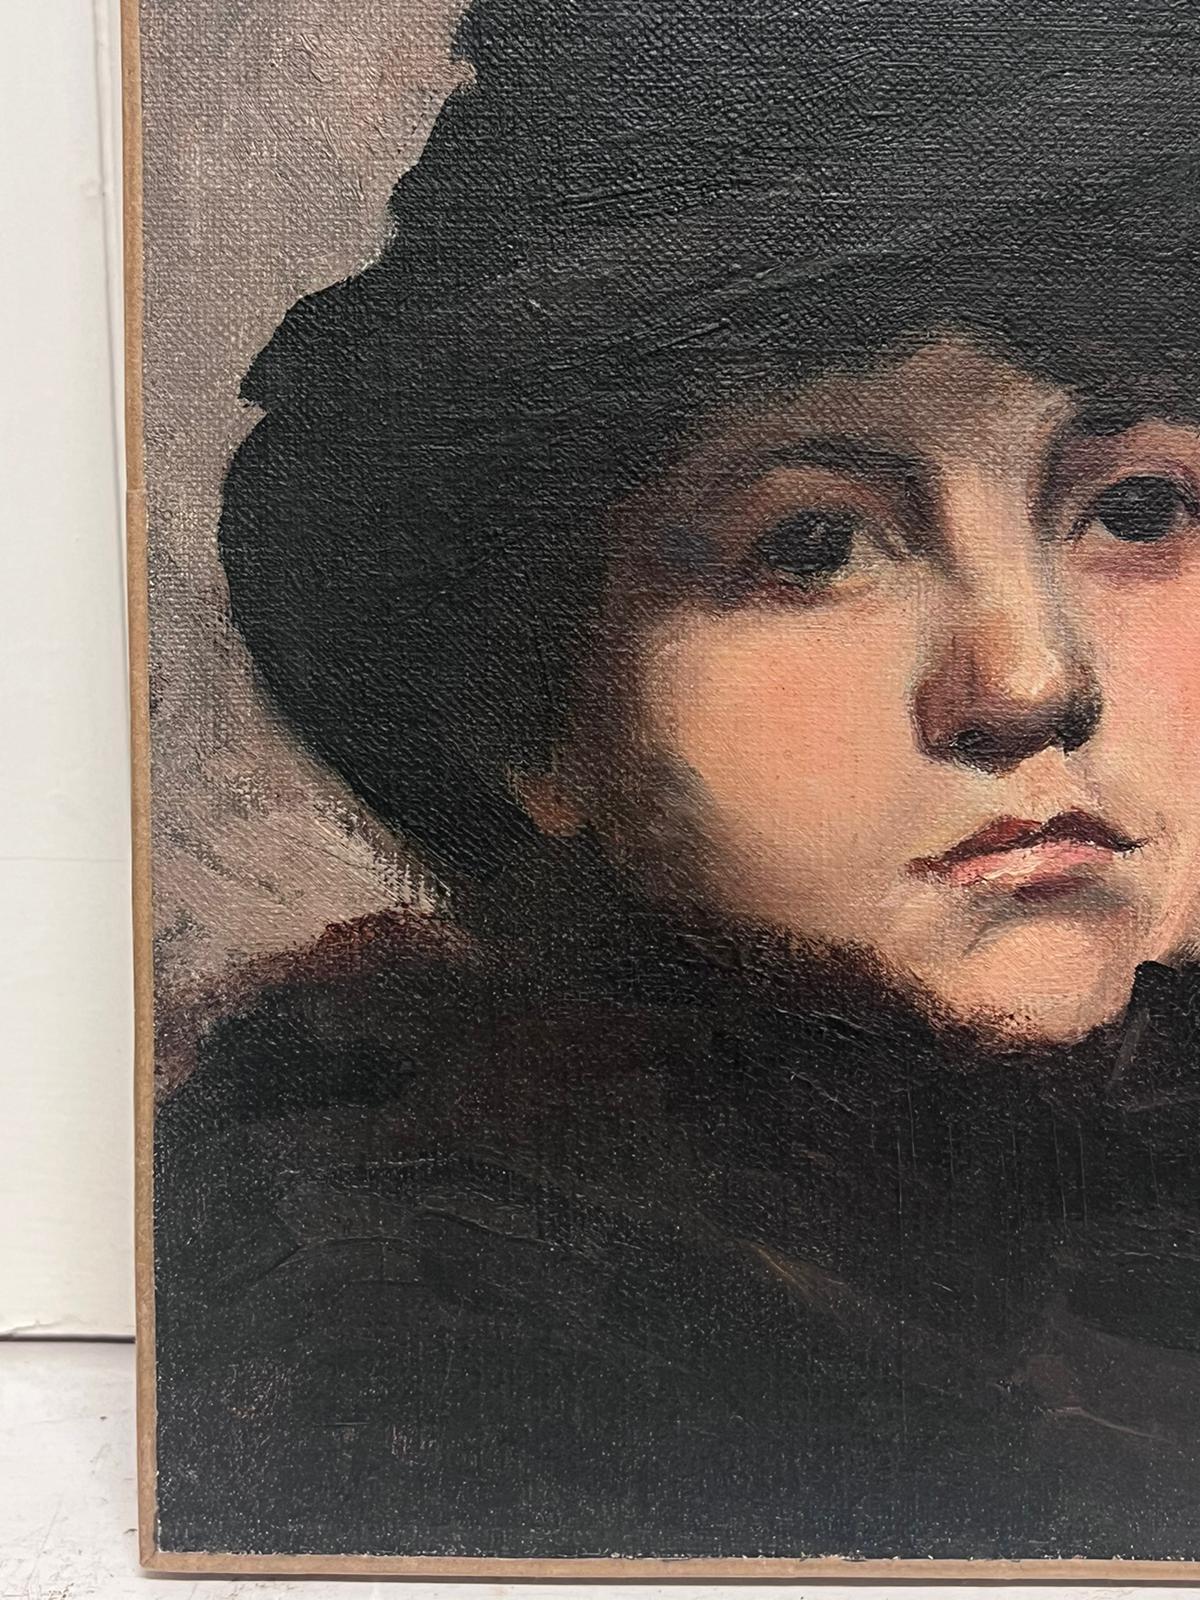 The Lady in a Black Hat
French Impressionist painter from the late 19th century
oil on canvas
canvas: 11 x 9 inches
provenance: private collection, Paris, France
condition: very good and sound condition